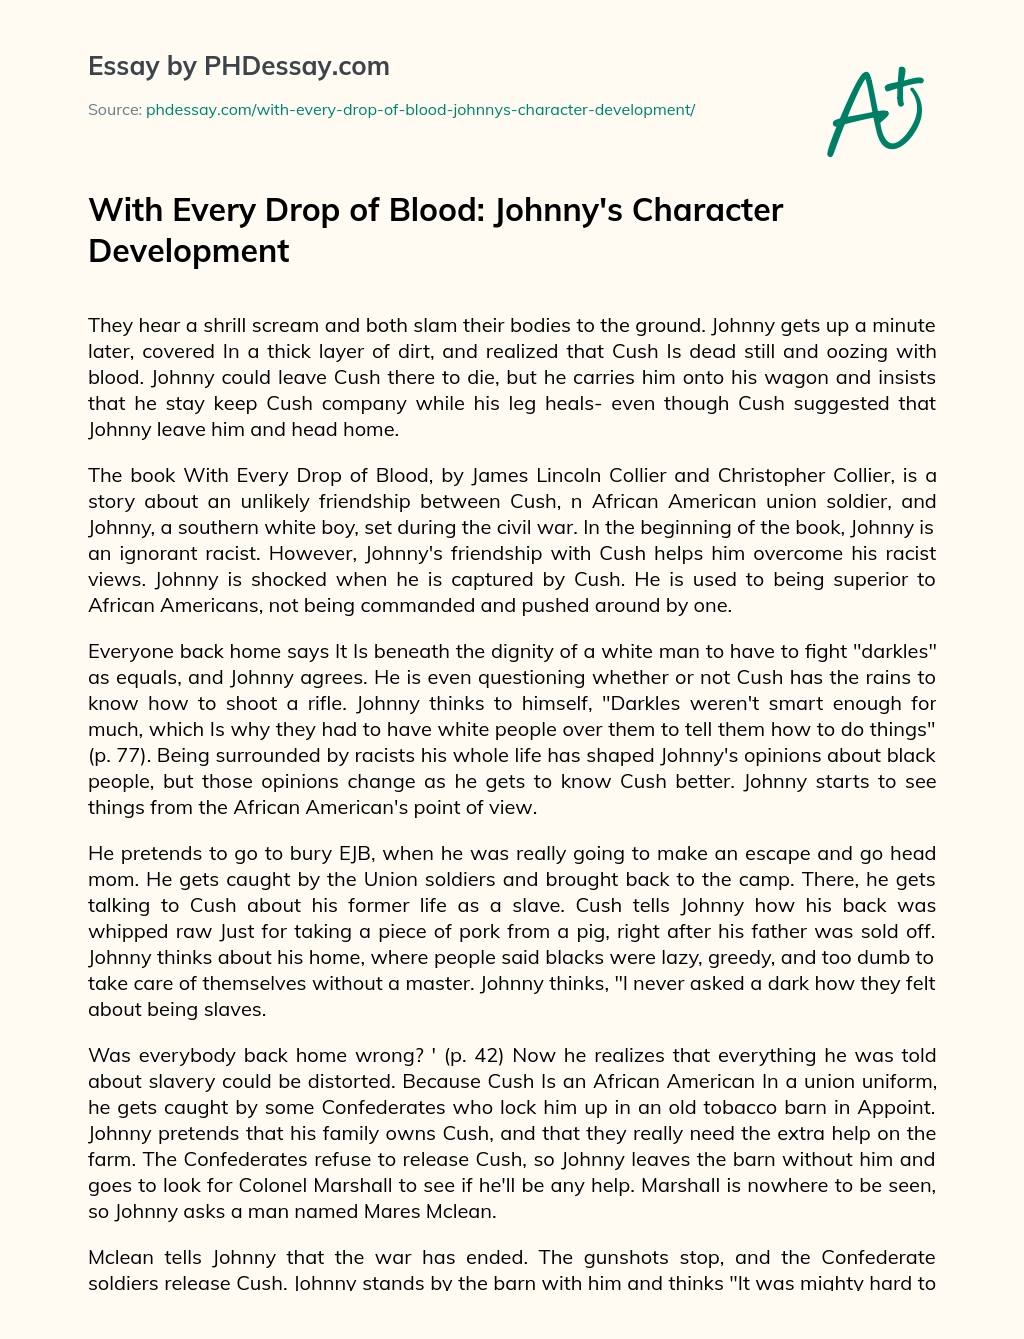 With Every Drop of Blood: Johnny’s Character Development essay